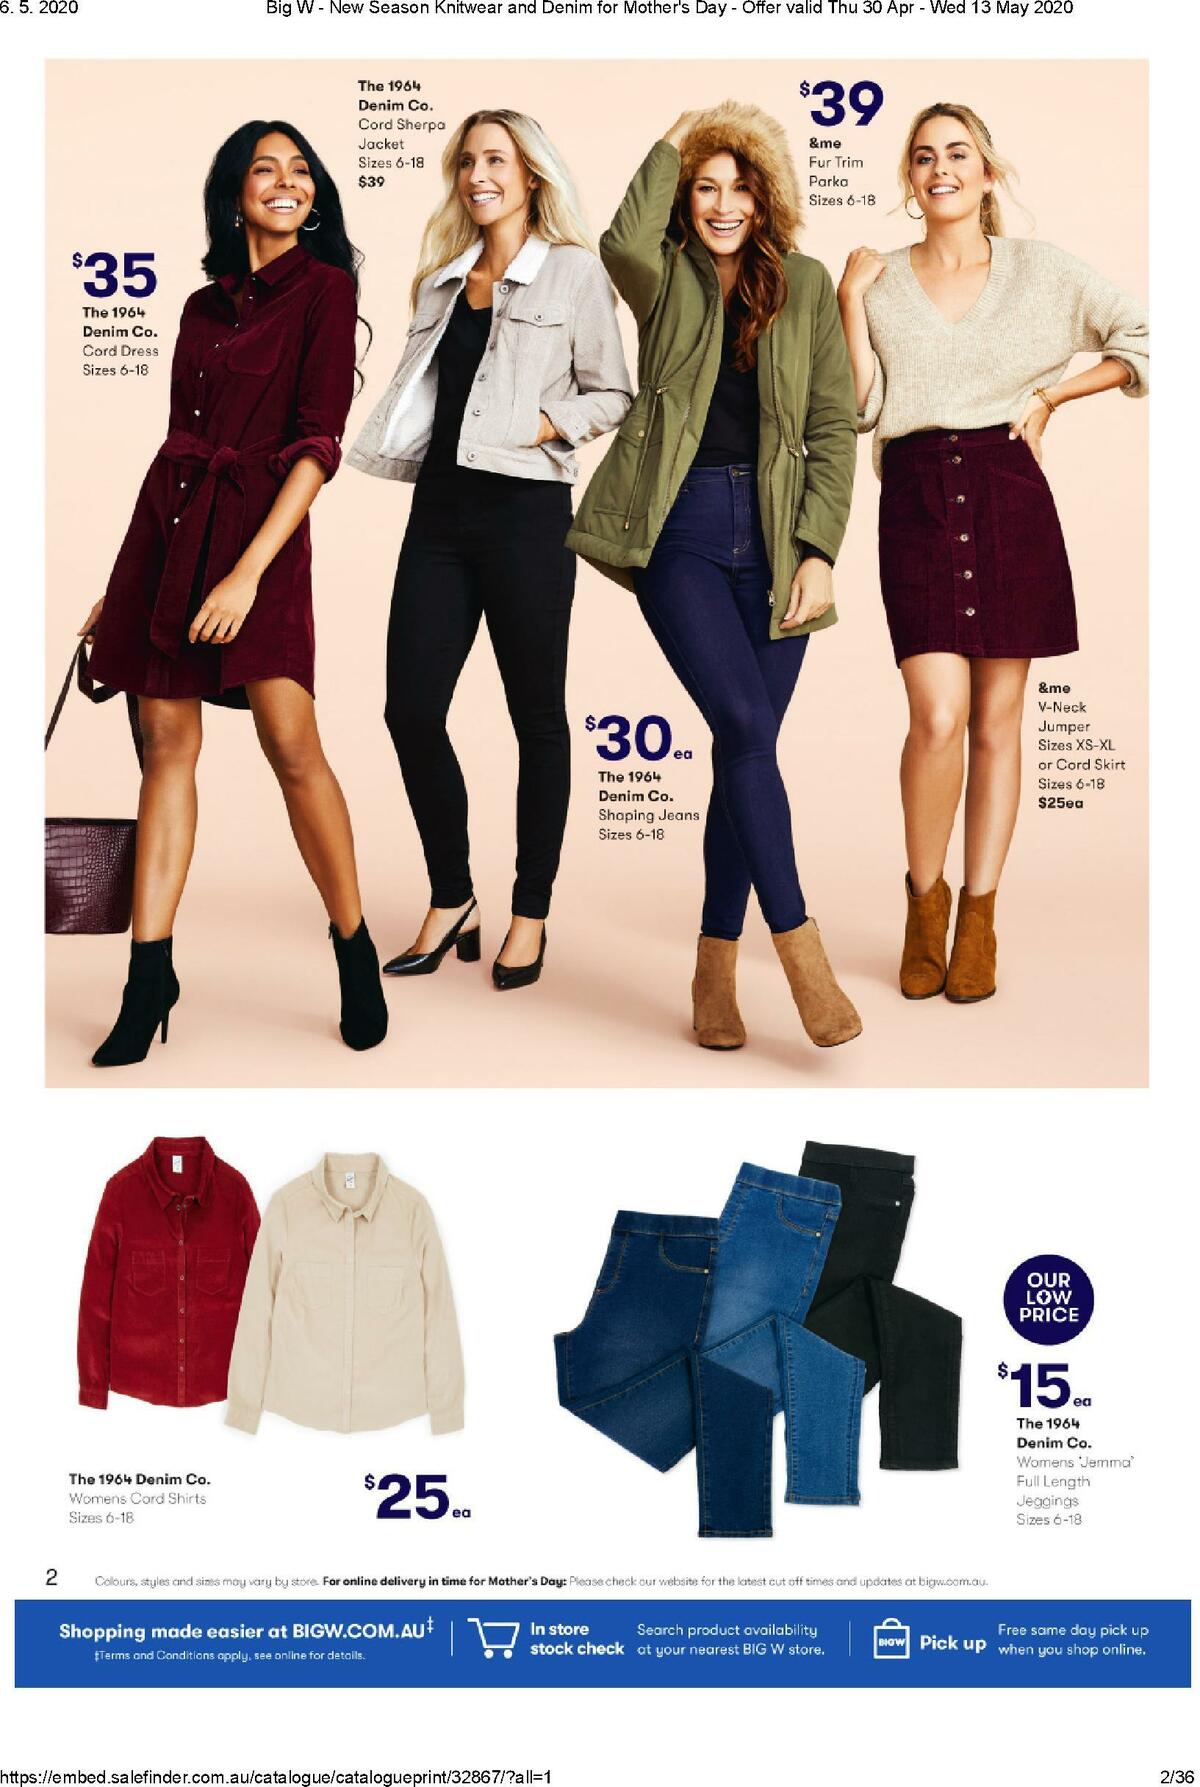 Big W New Season Knitwear and Denim for Mother's Day Catalogues from 30 April